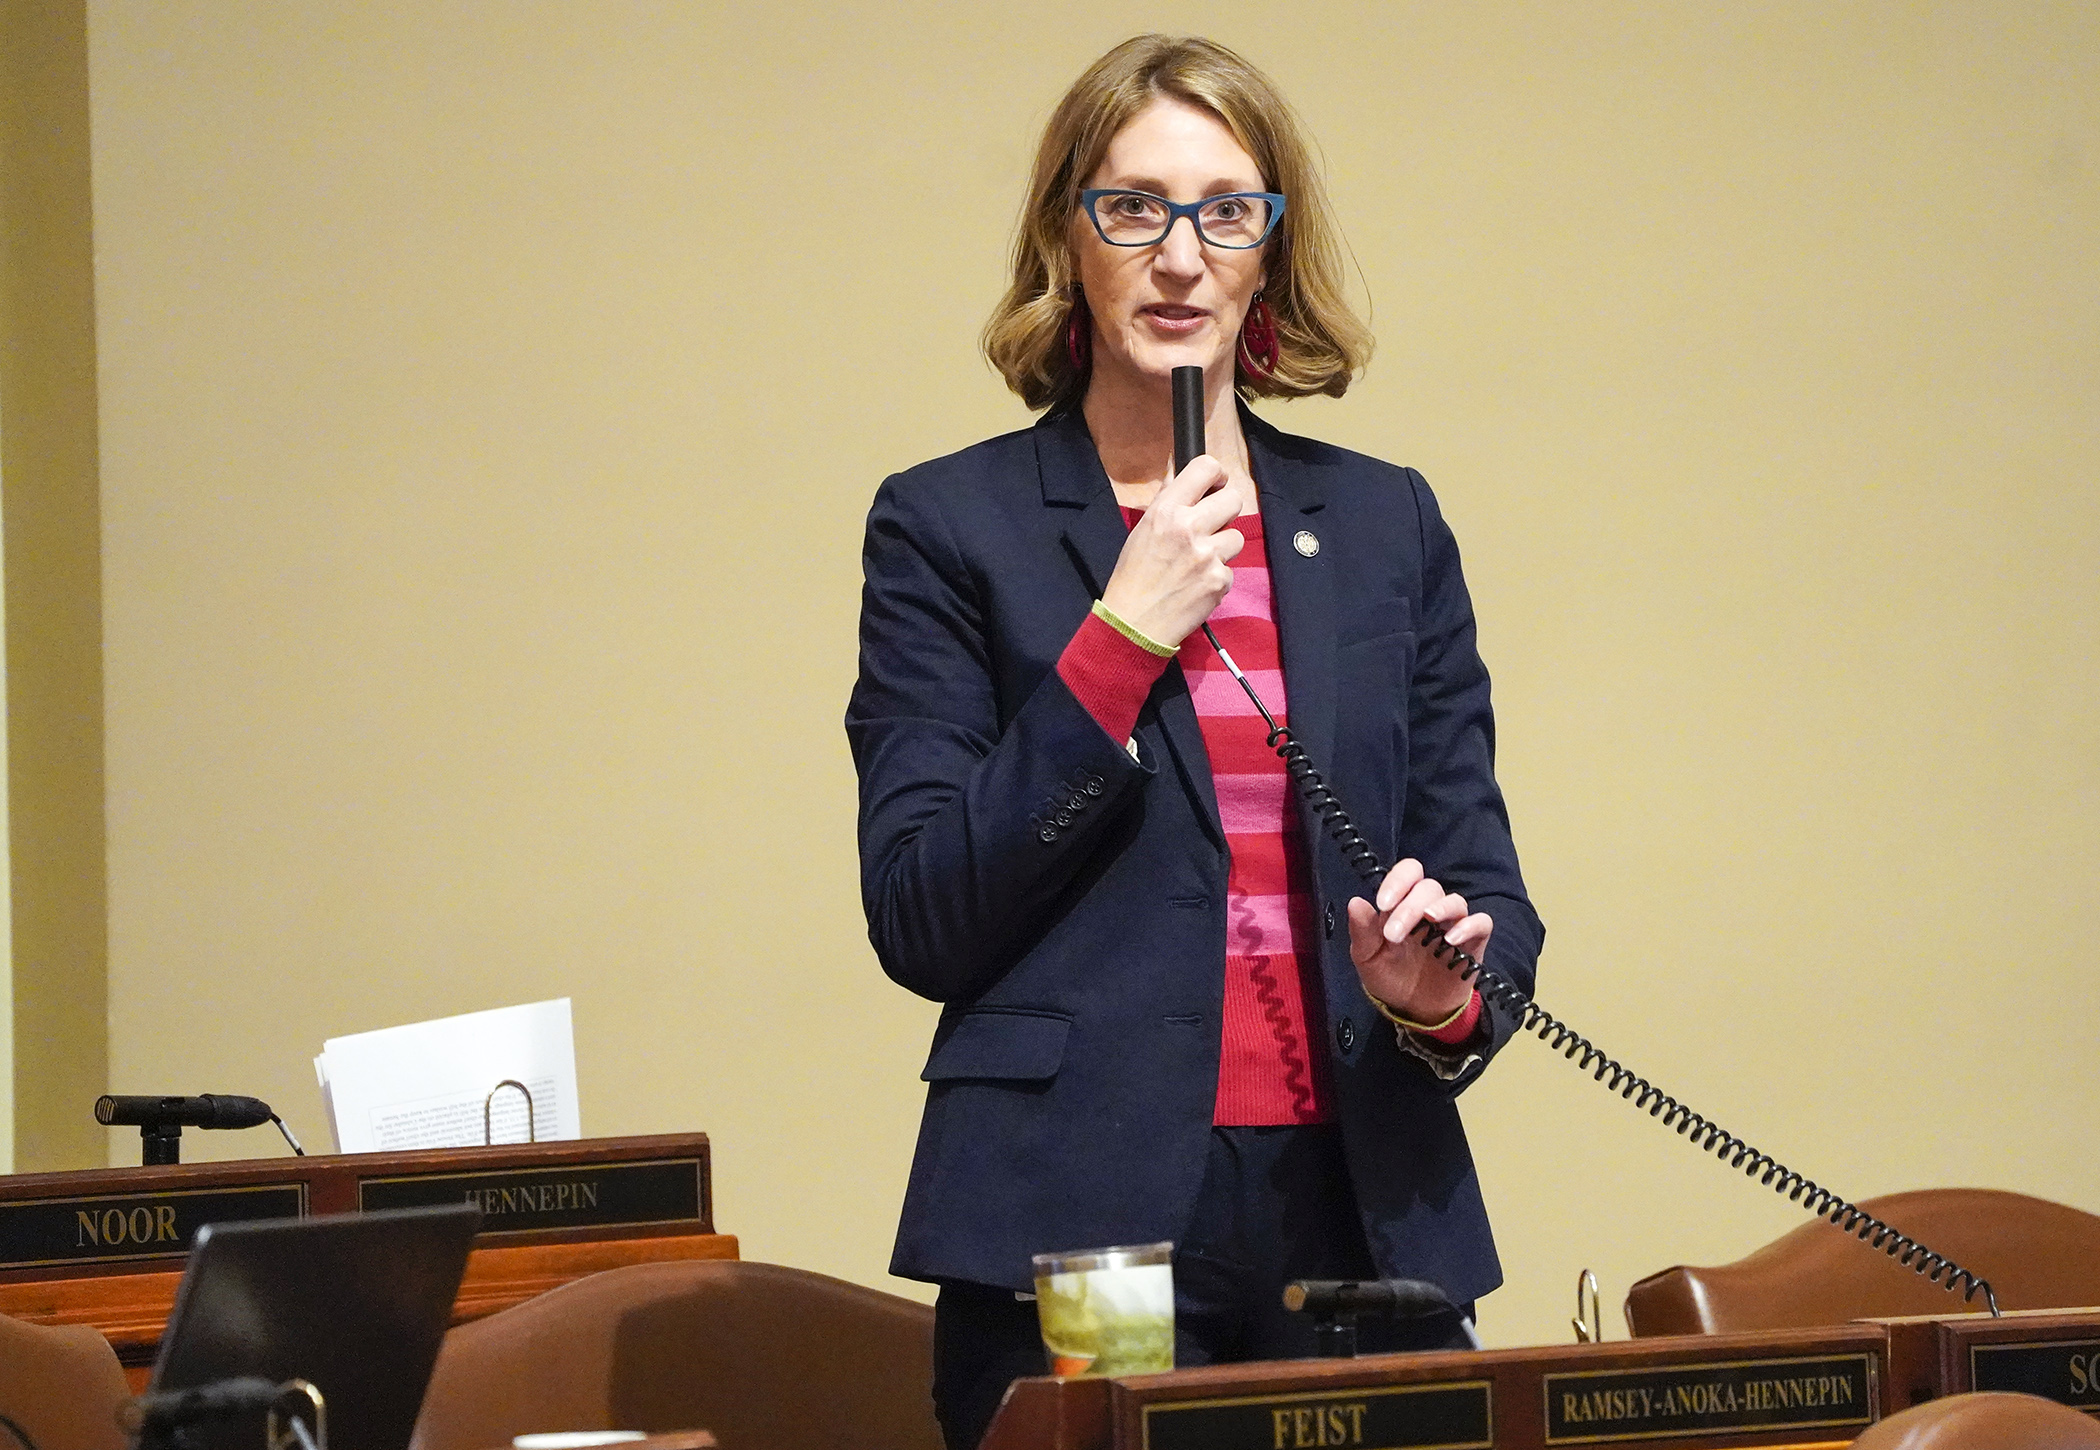 Rep. Jennifer Schultz, chair of the House Human Services Finance and Policy Committee, makes opening remarks as debate on HF4706/SF4410*, the omnibus health and human services bill, begins May 3. (Photo by Paul Battaglia)